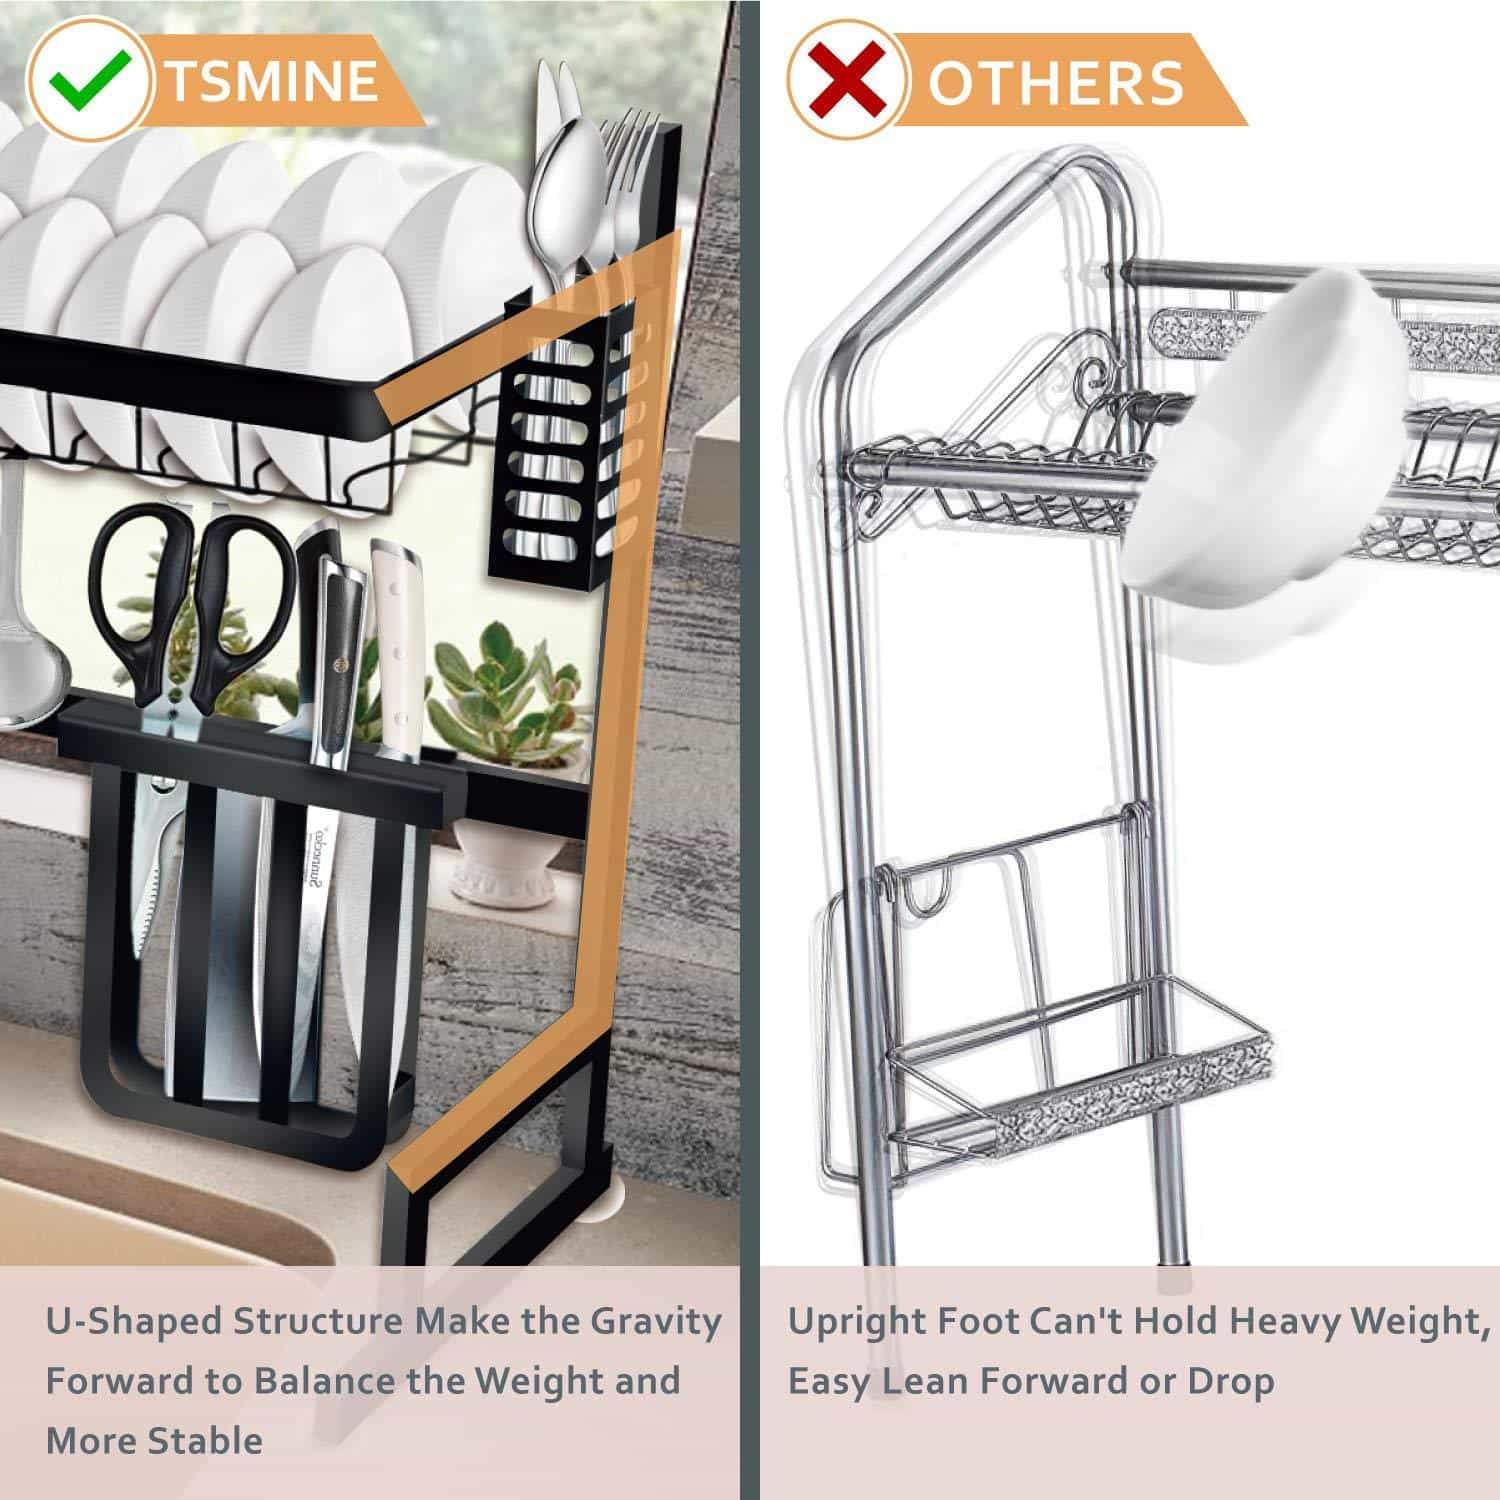 Save dish drying rack over the sink tsmine large dish drainers for kitchen counter stainless steel drain bowl dish rack kitchen supplies storage shelf utensils holder with 7 utility holder hooks